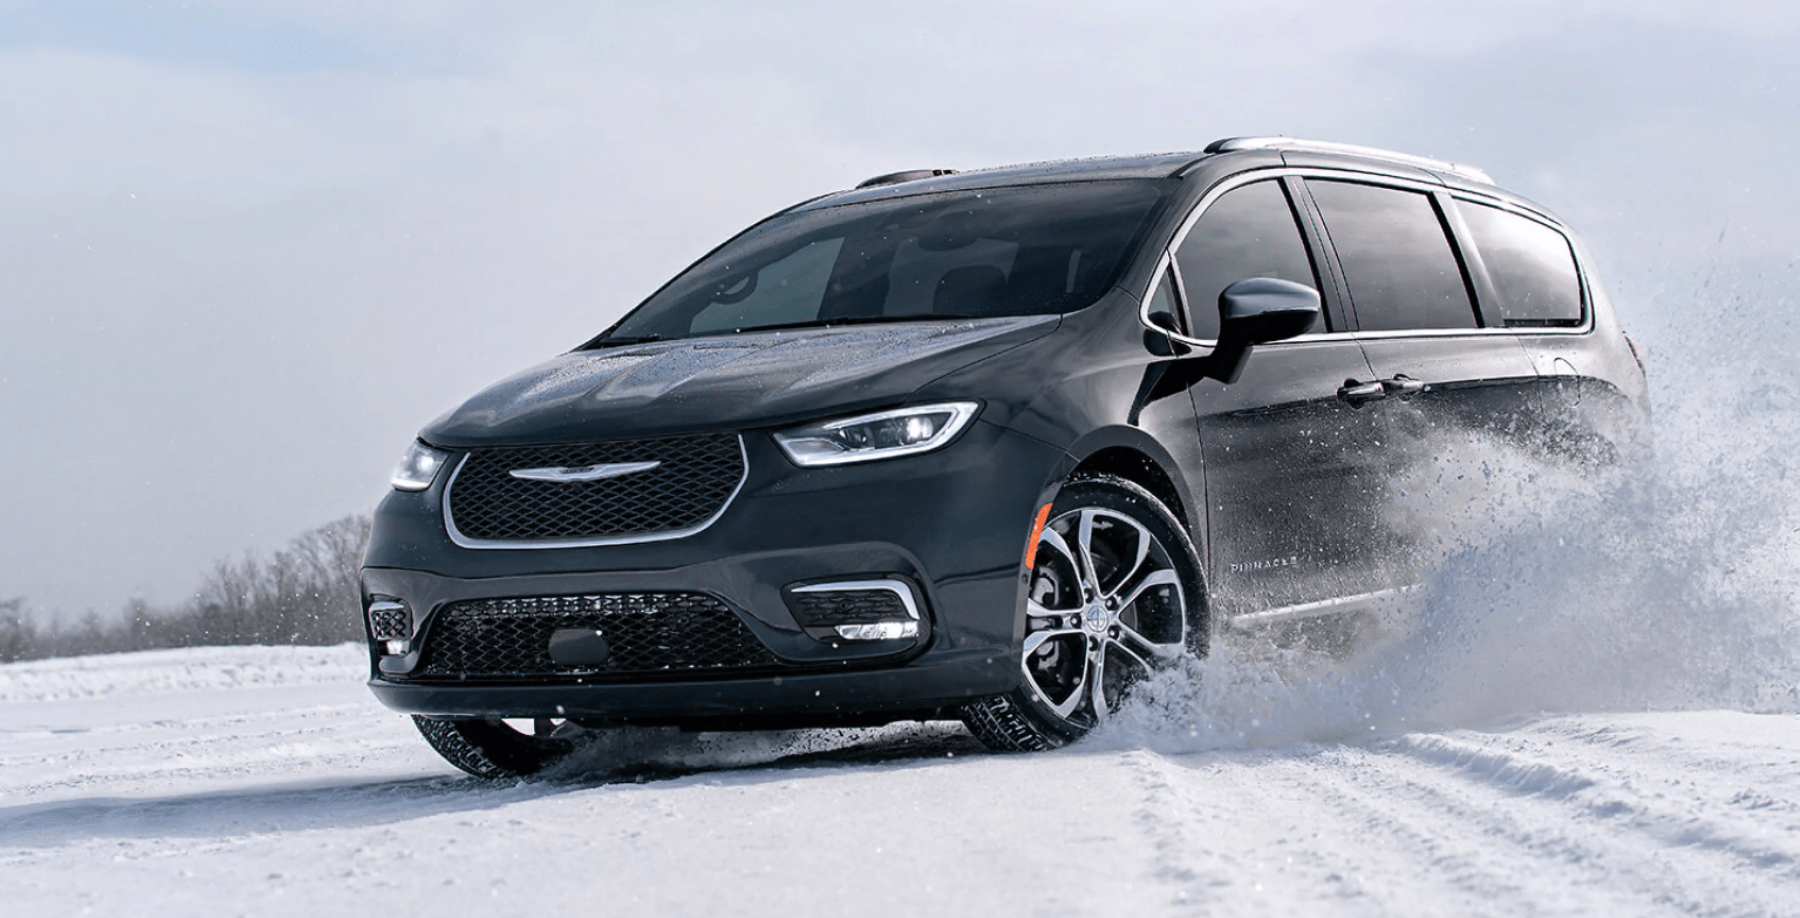 2022 Chrysler Pacifica Pinnacle minivan with all-wheel drive (AWD) driving through off-road snow